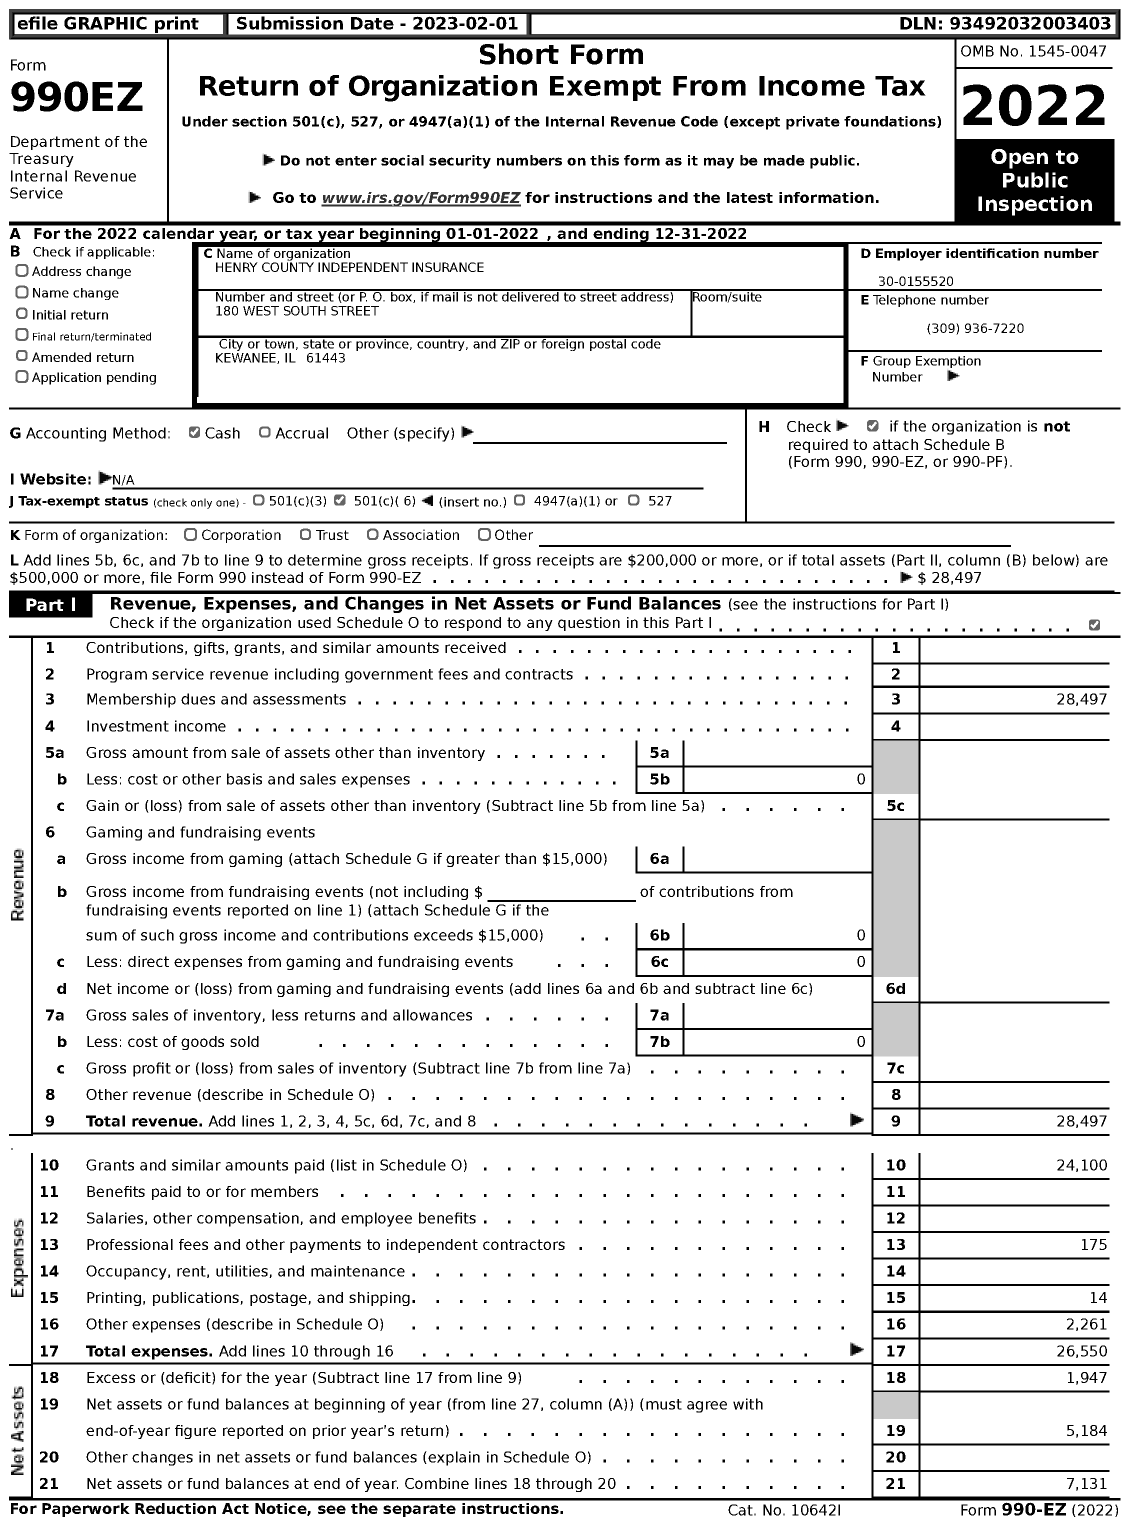 Image of first page of 2022 Form 990EZ for Henry County Independent Insurance